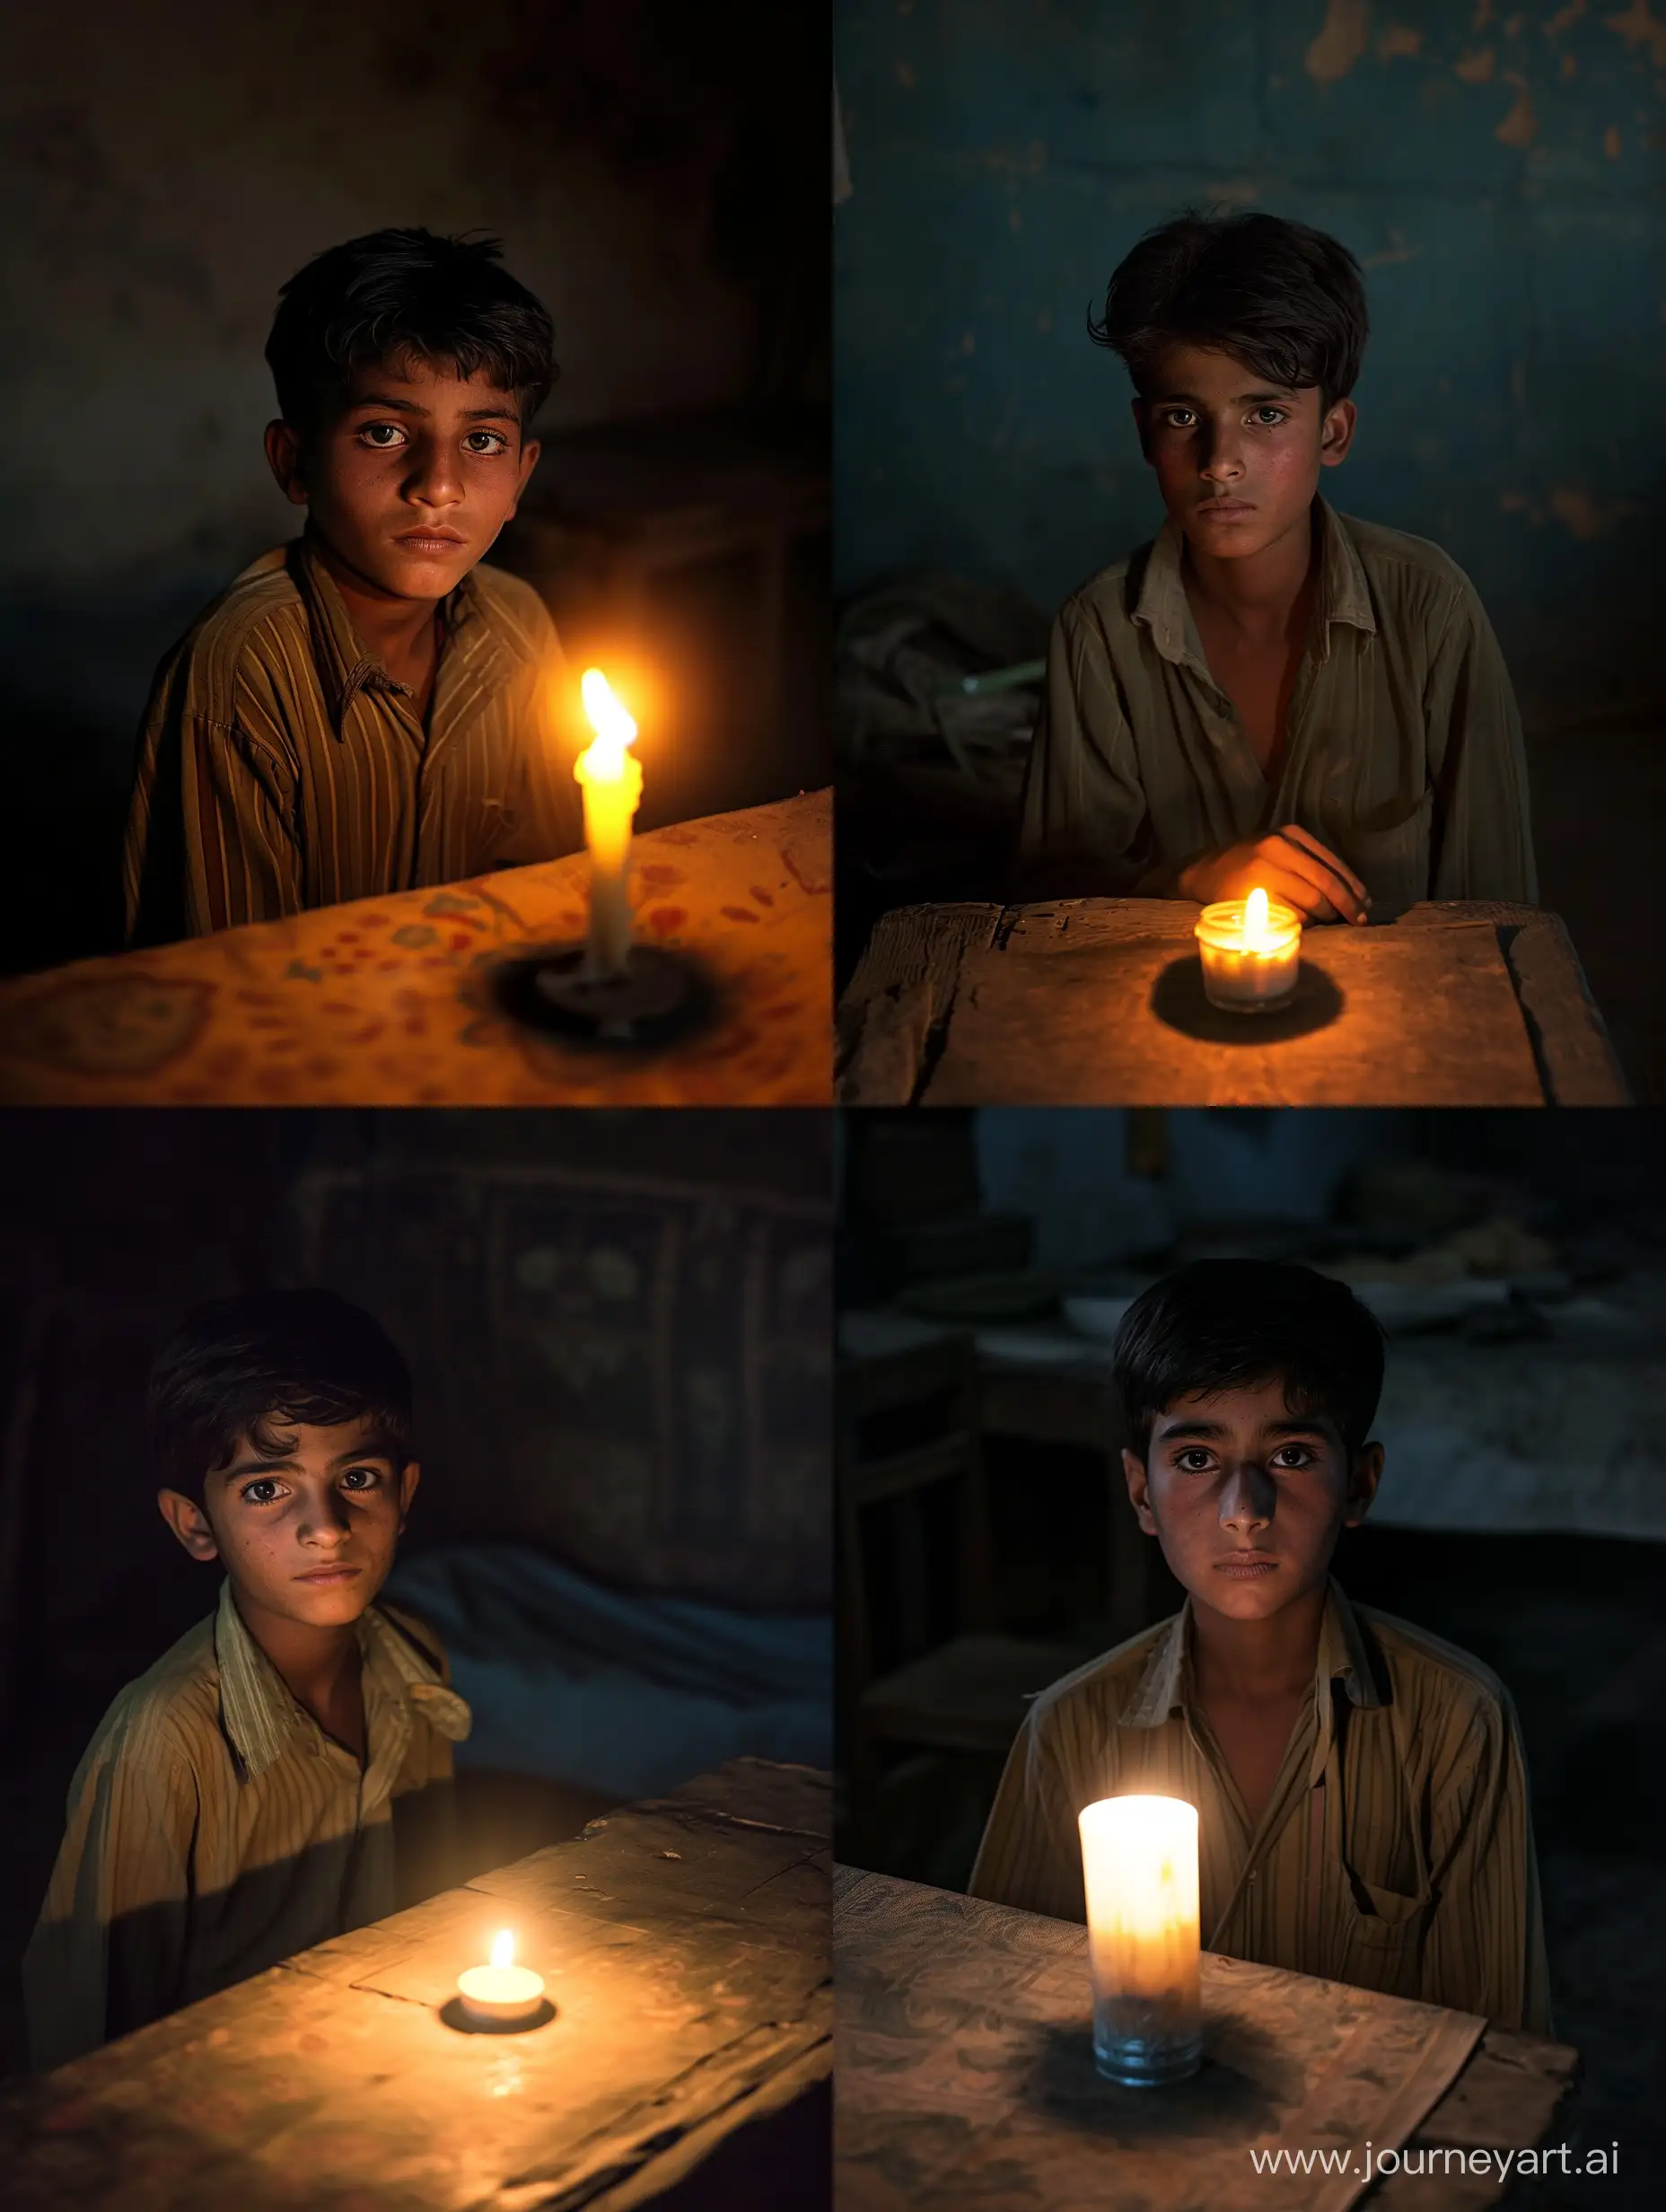 A charming 19-year-old Pakistani boy sits in front of a table illuminated by the soft glow of a single candle.